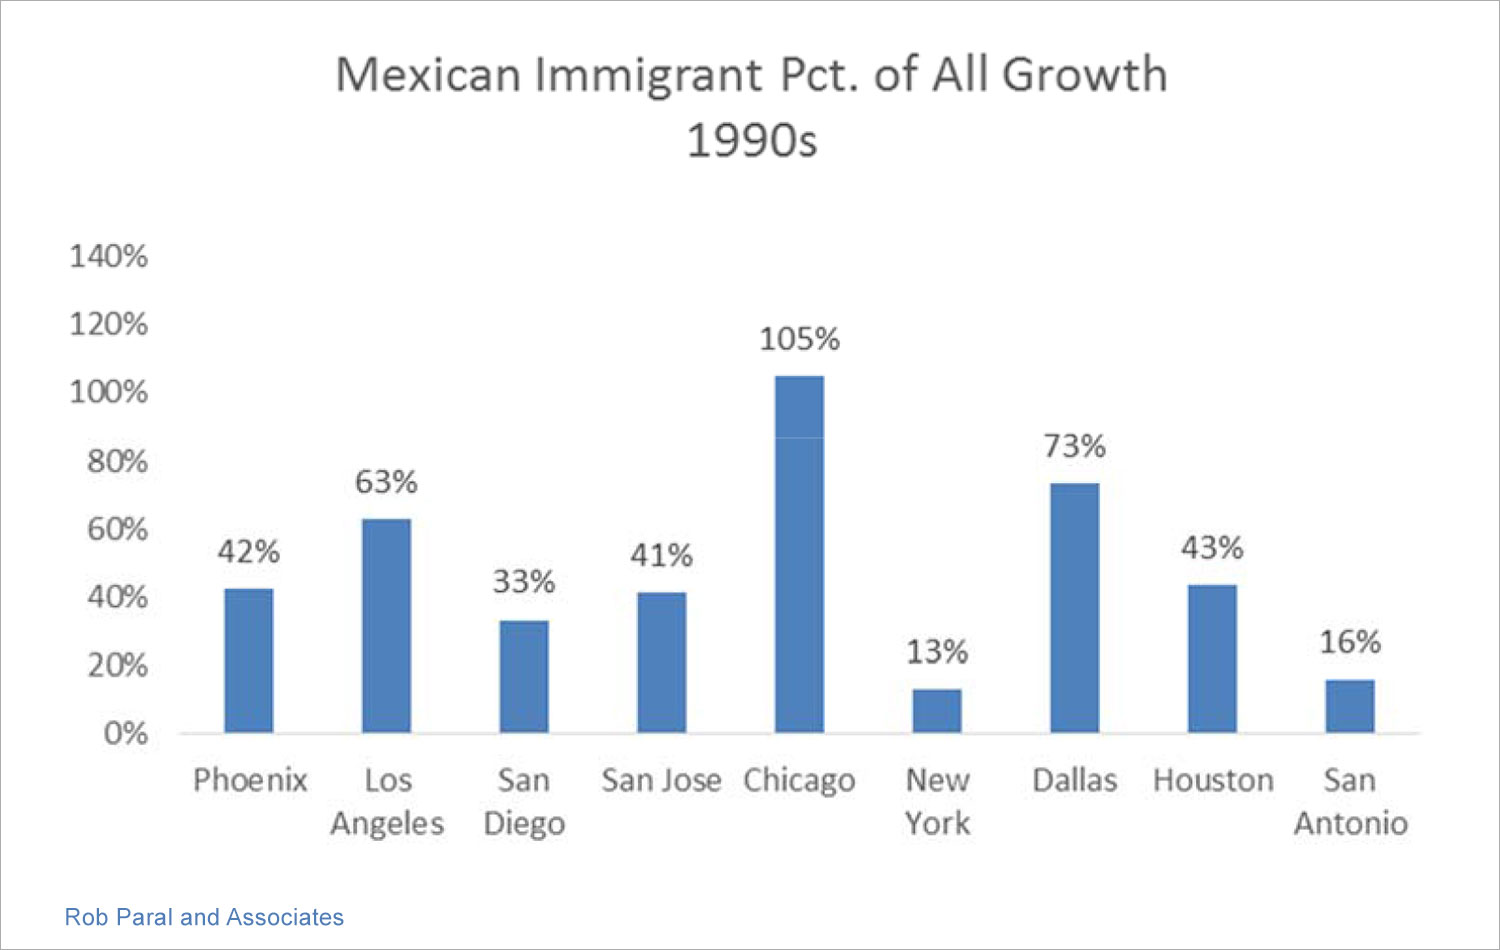 Bar graph showing Mexican immigrant percentage of all growth in the 1990s